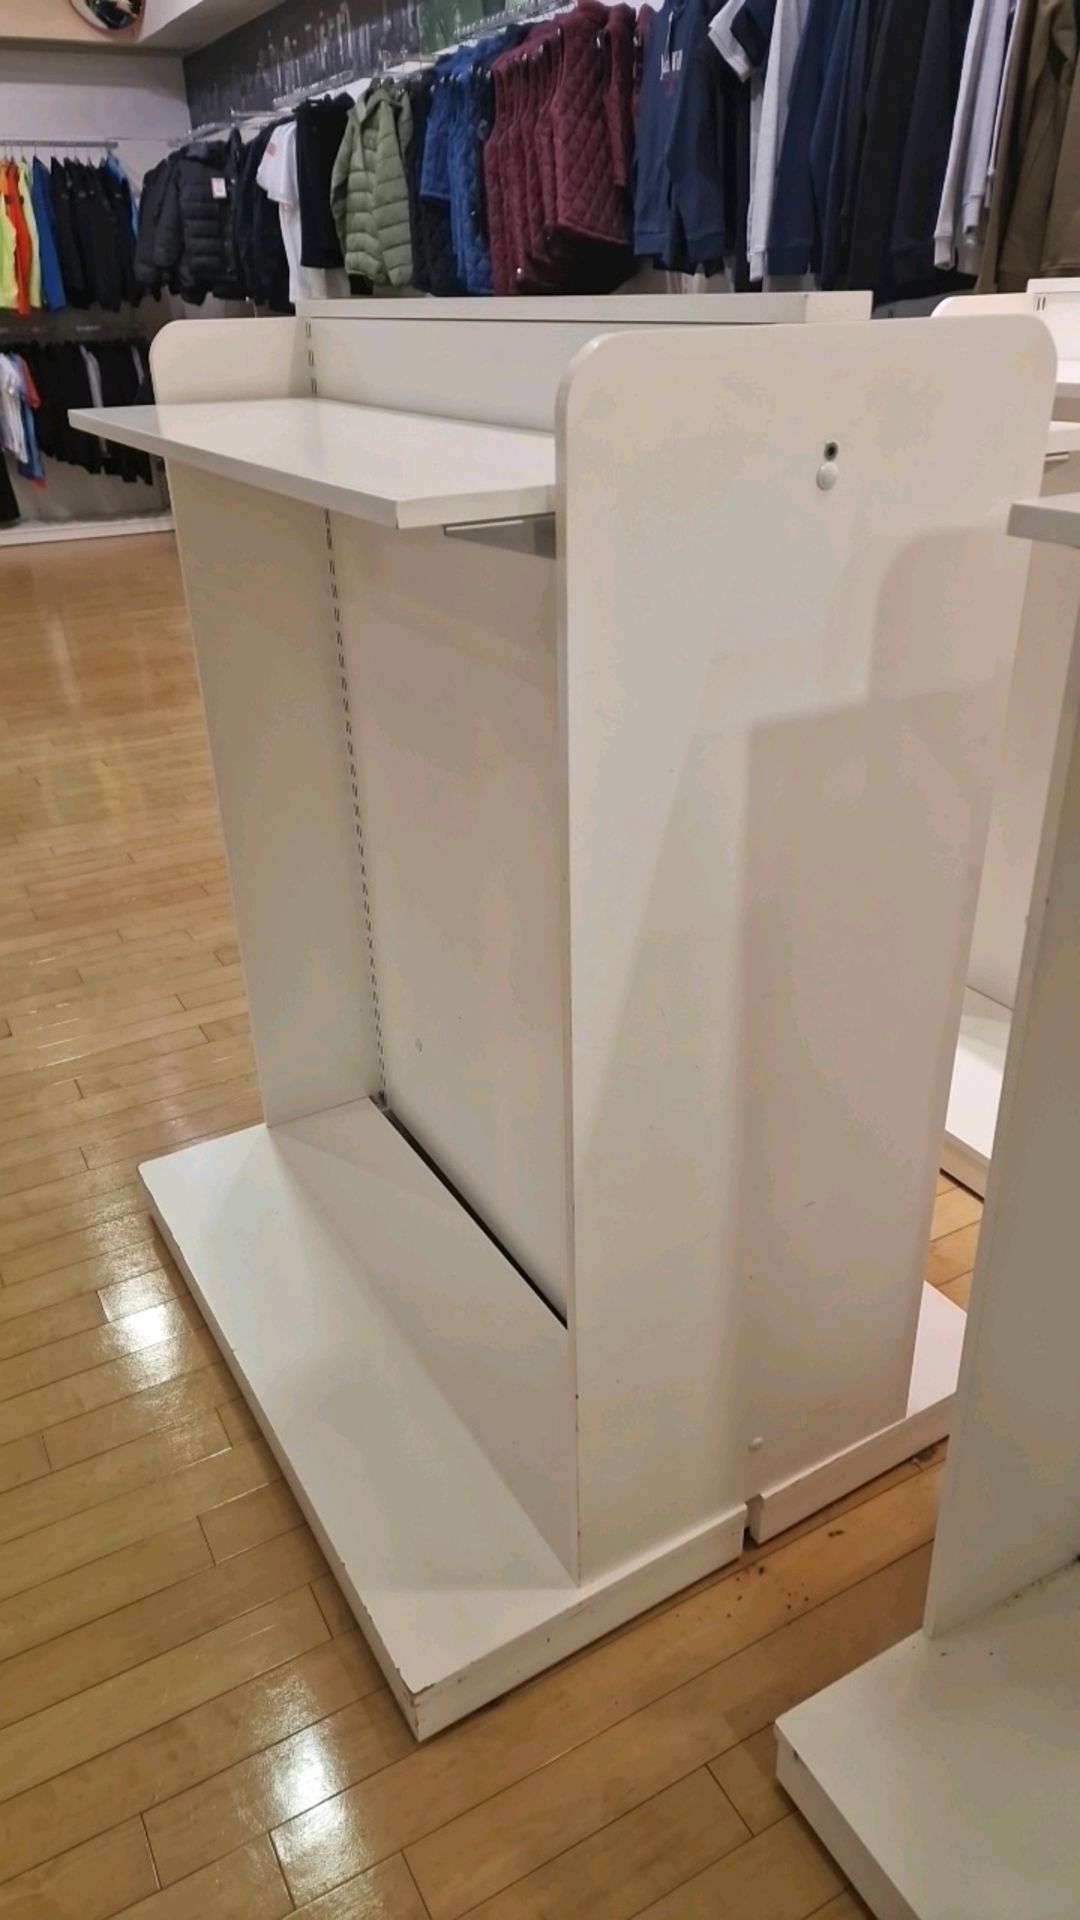 White Wooden Display Stand